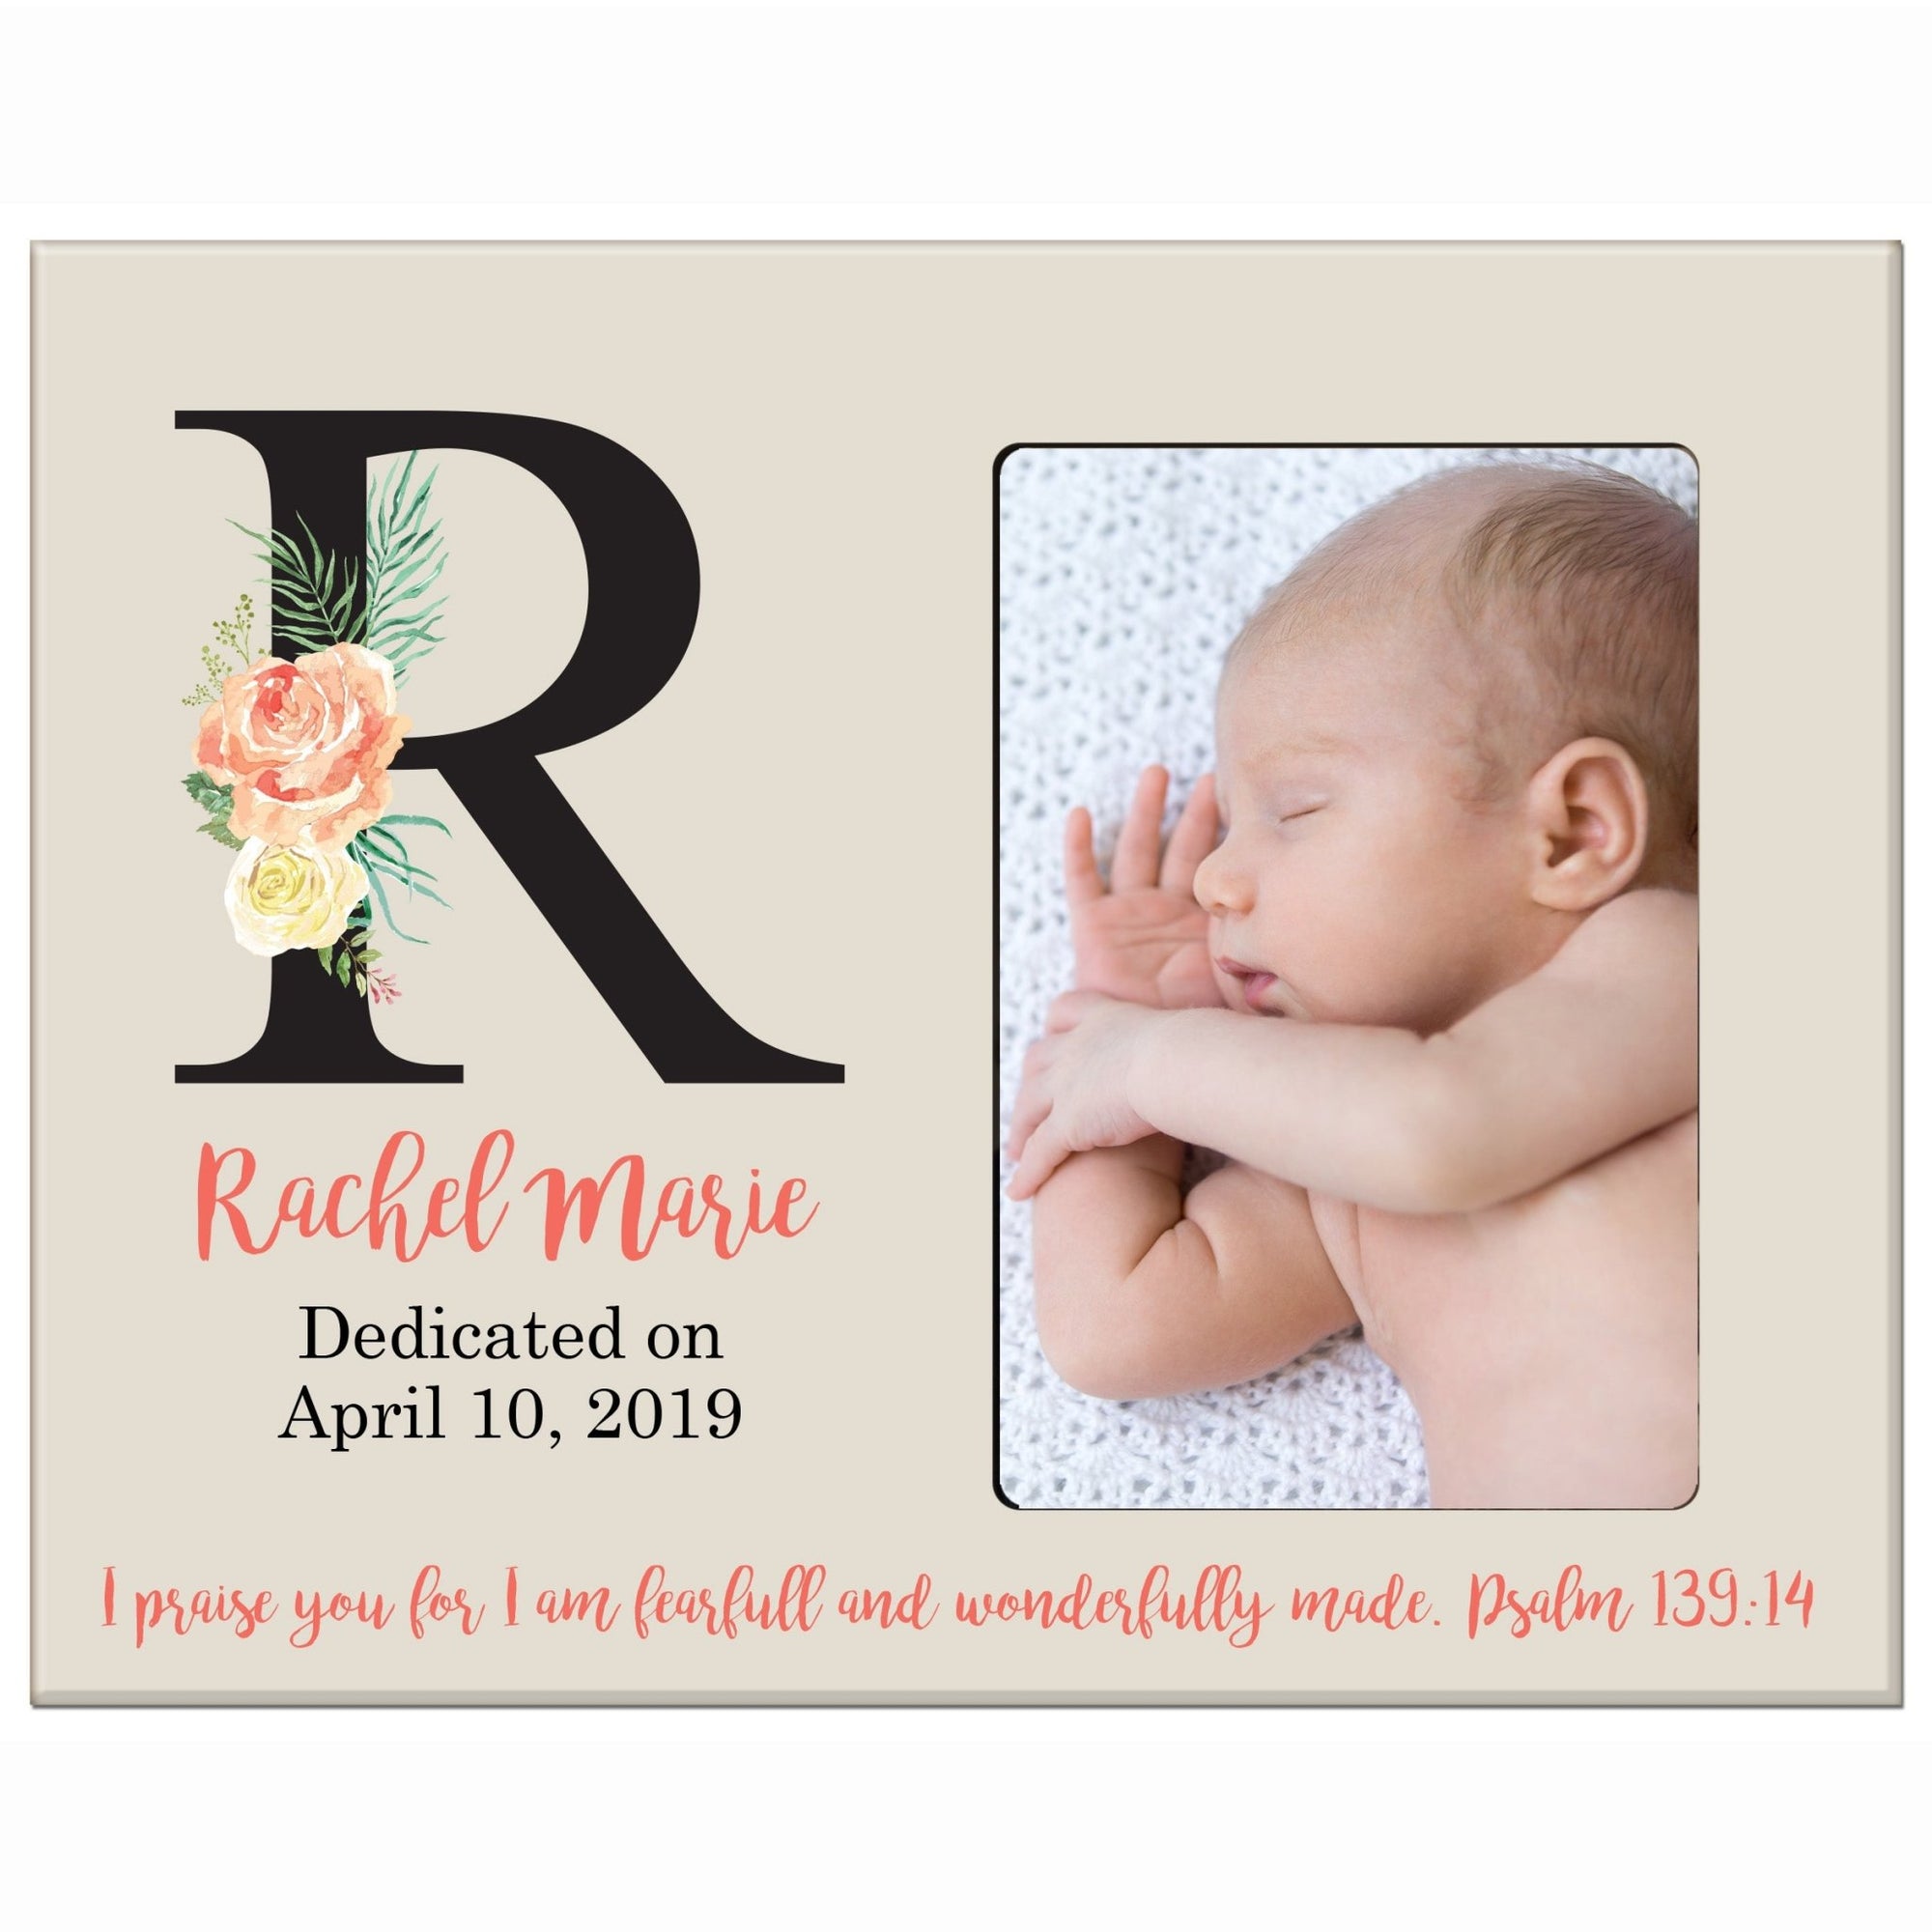 Baby Birth Announcement Photo Frame For Boys and Girls Psalm 139:14 - LifeSong Milestones